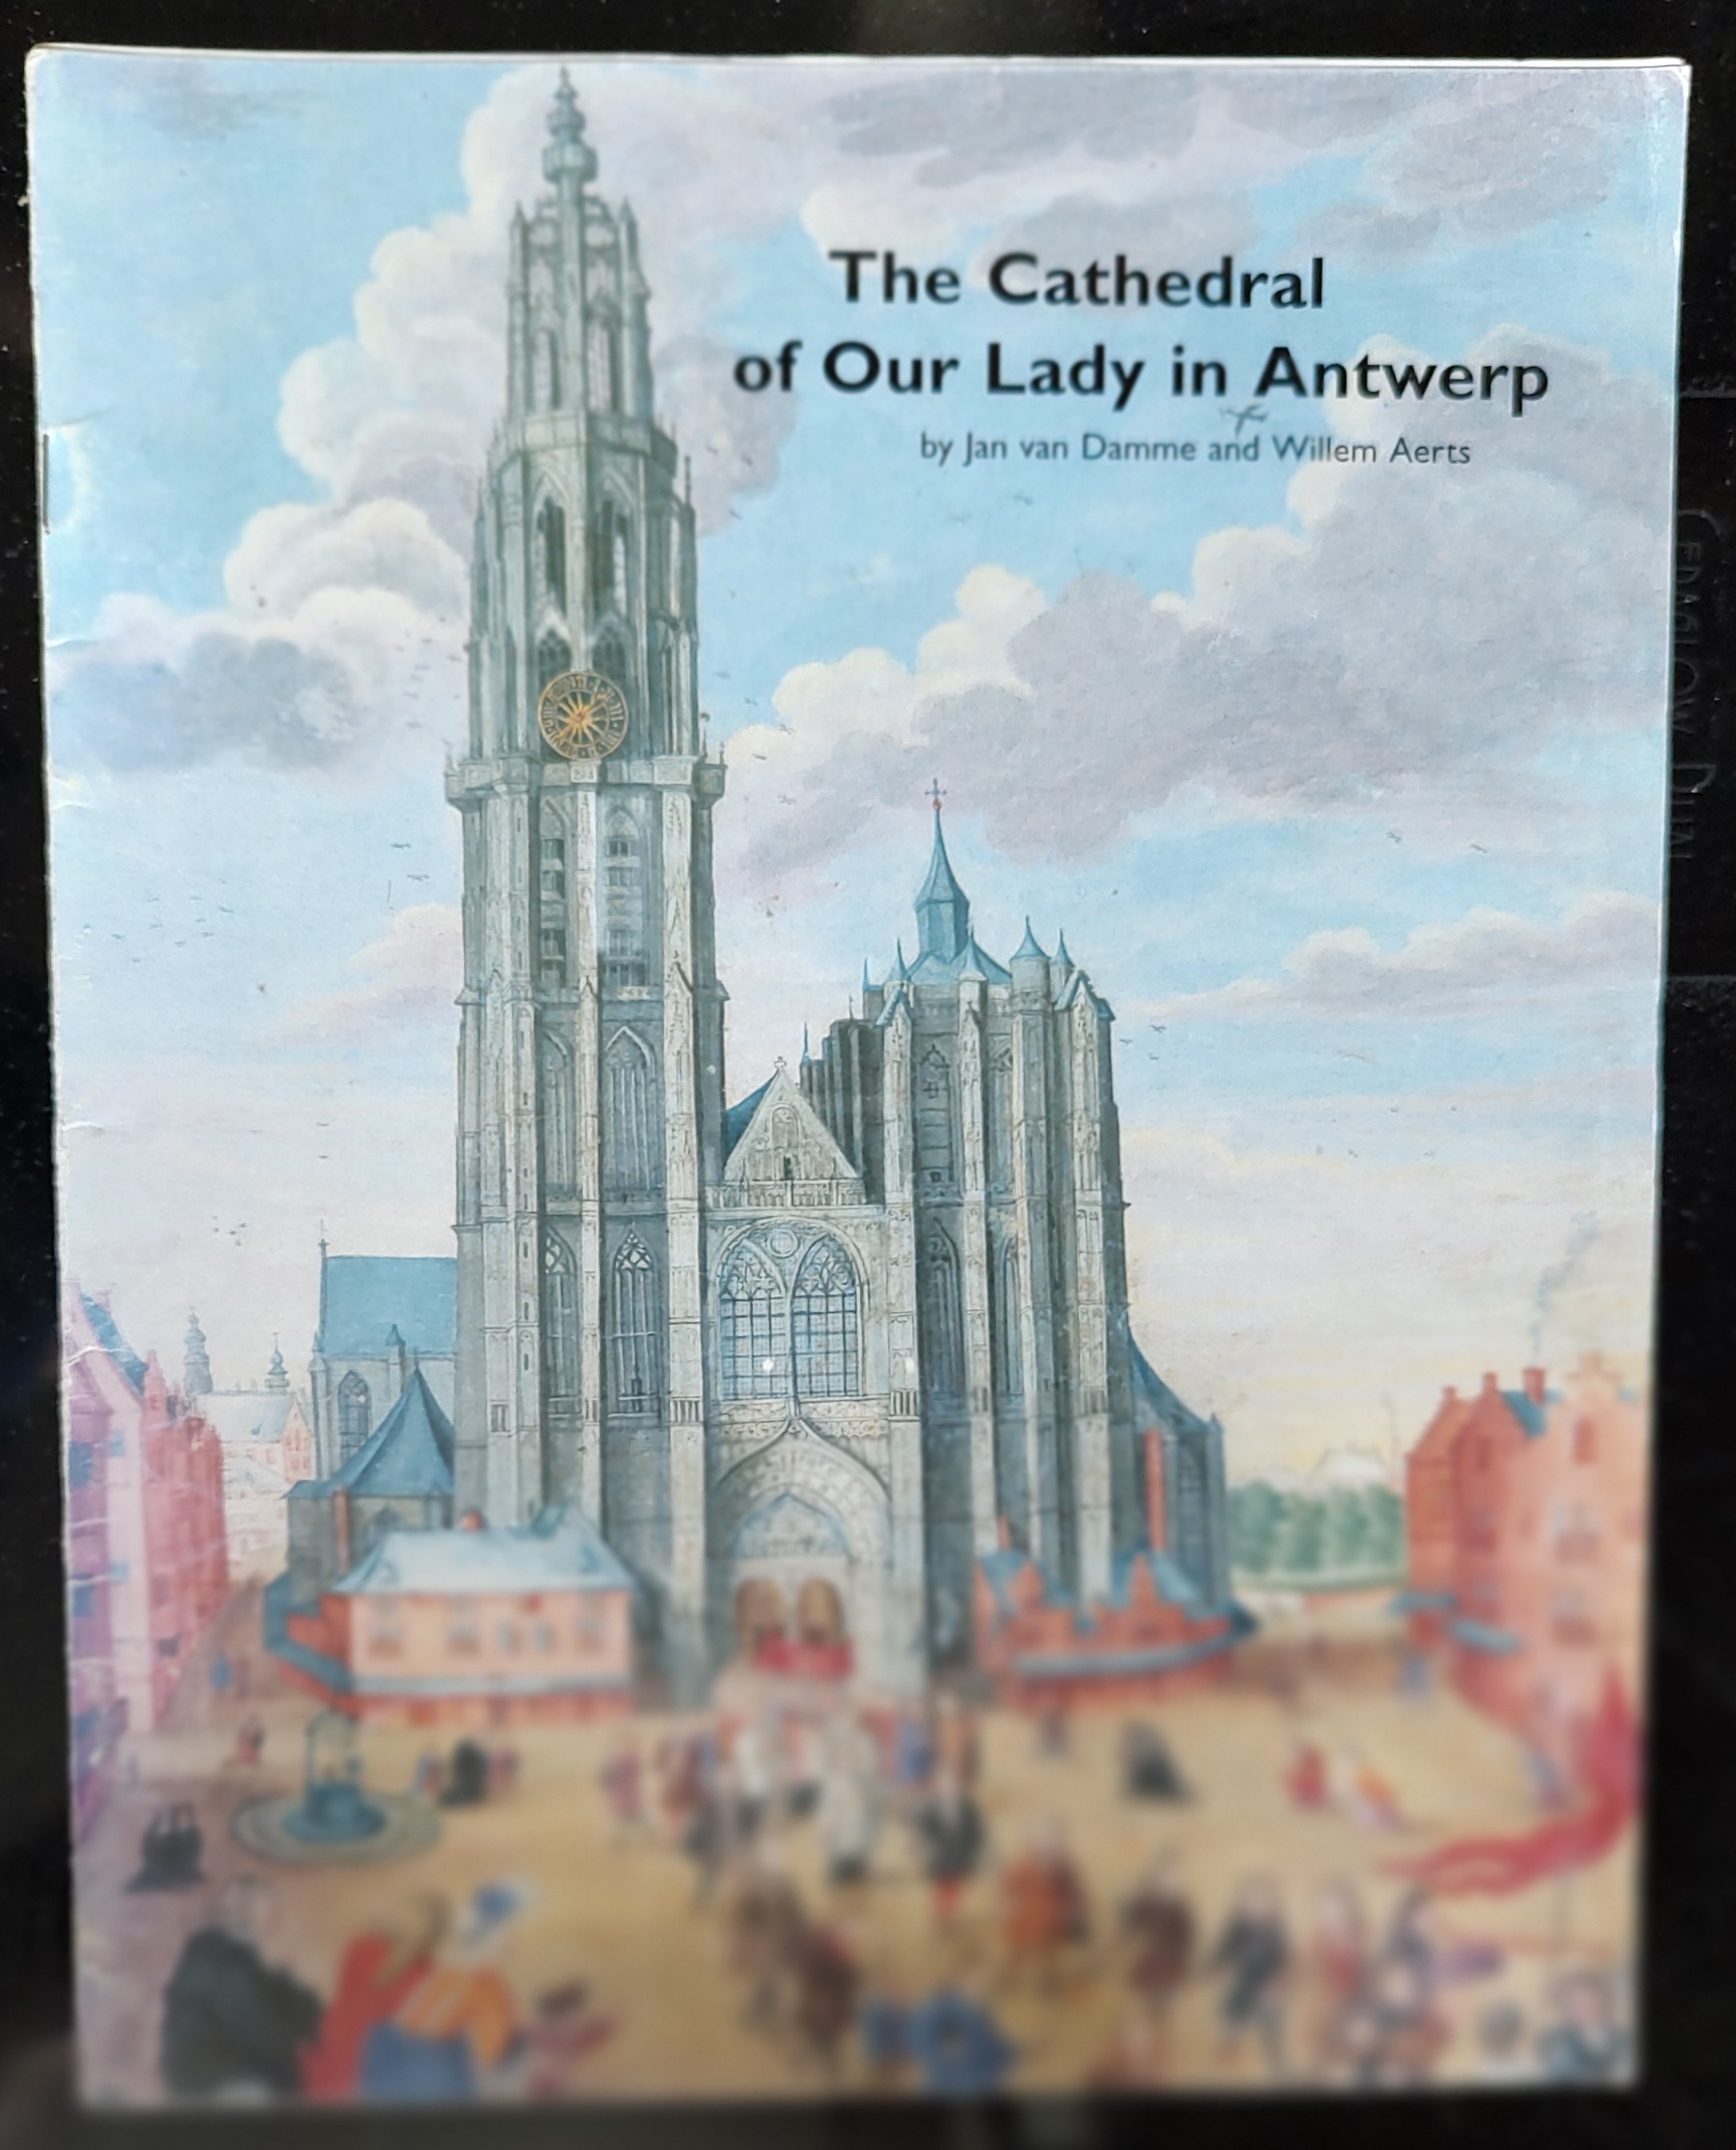 The Cathedral of Our Lady in Antwerp - Jan van Damme and Willem Aerts